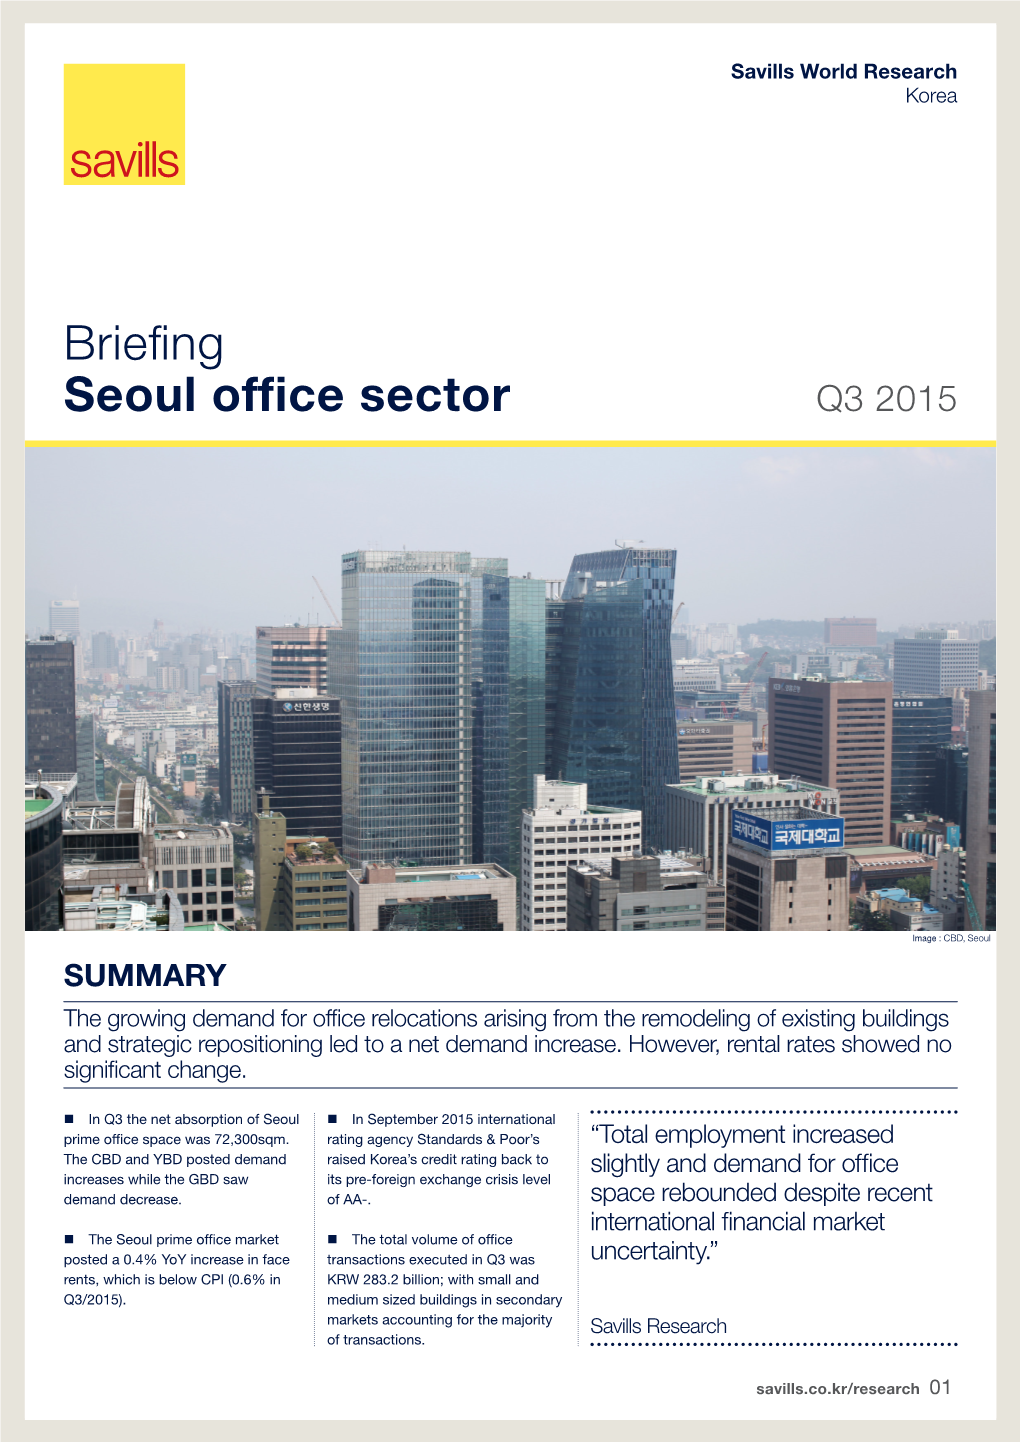 Briefing Seoul Office Sector Q3 2015